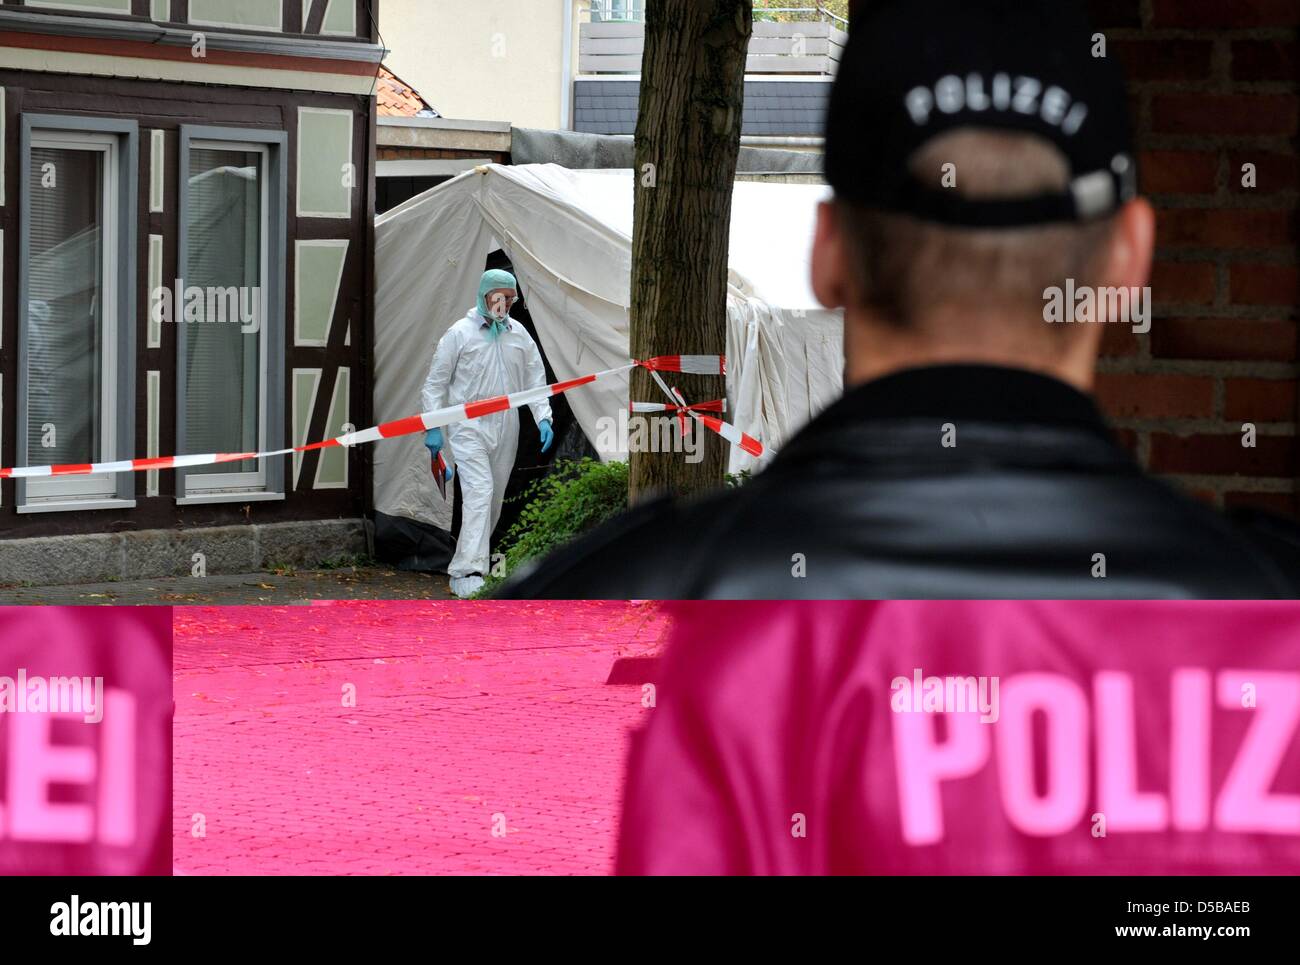 A policeman secures the site of discovery of a five year old dead boy in Dellingen (district Holzminden), while a crime investigator leaves a tent, Germany, 18 August 2010. The corpse was found in a garage next to the home of the mother. The five year old child was missing since Tuesday afternoon (17 August). Photo: Jochen Luebke Stock Photo